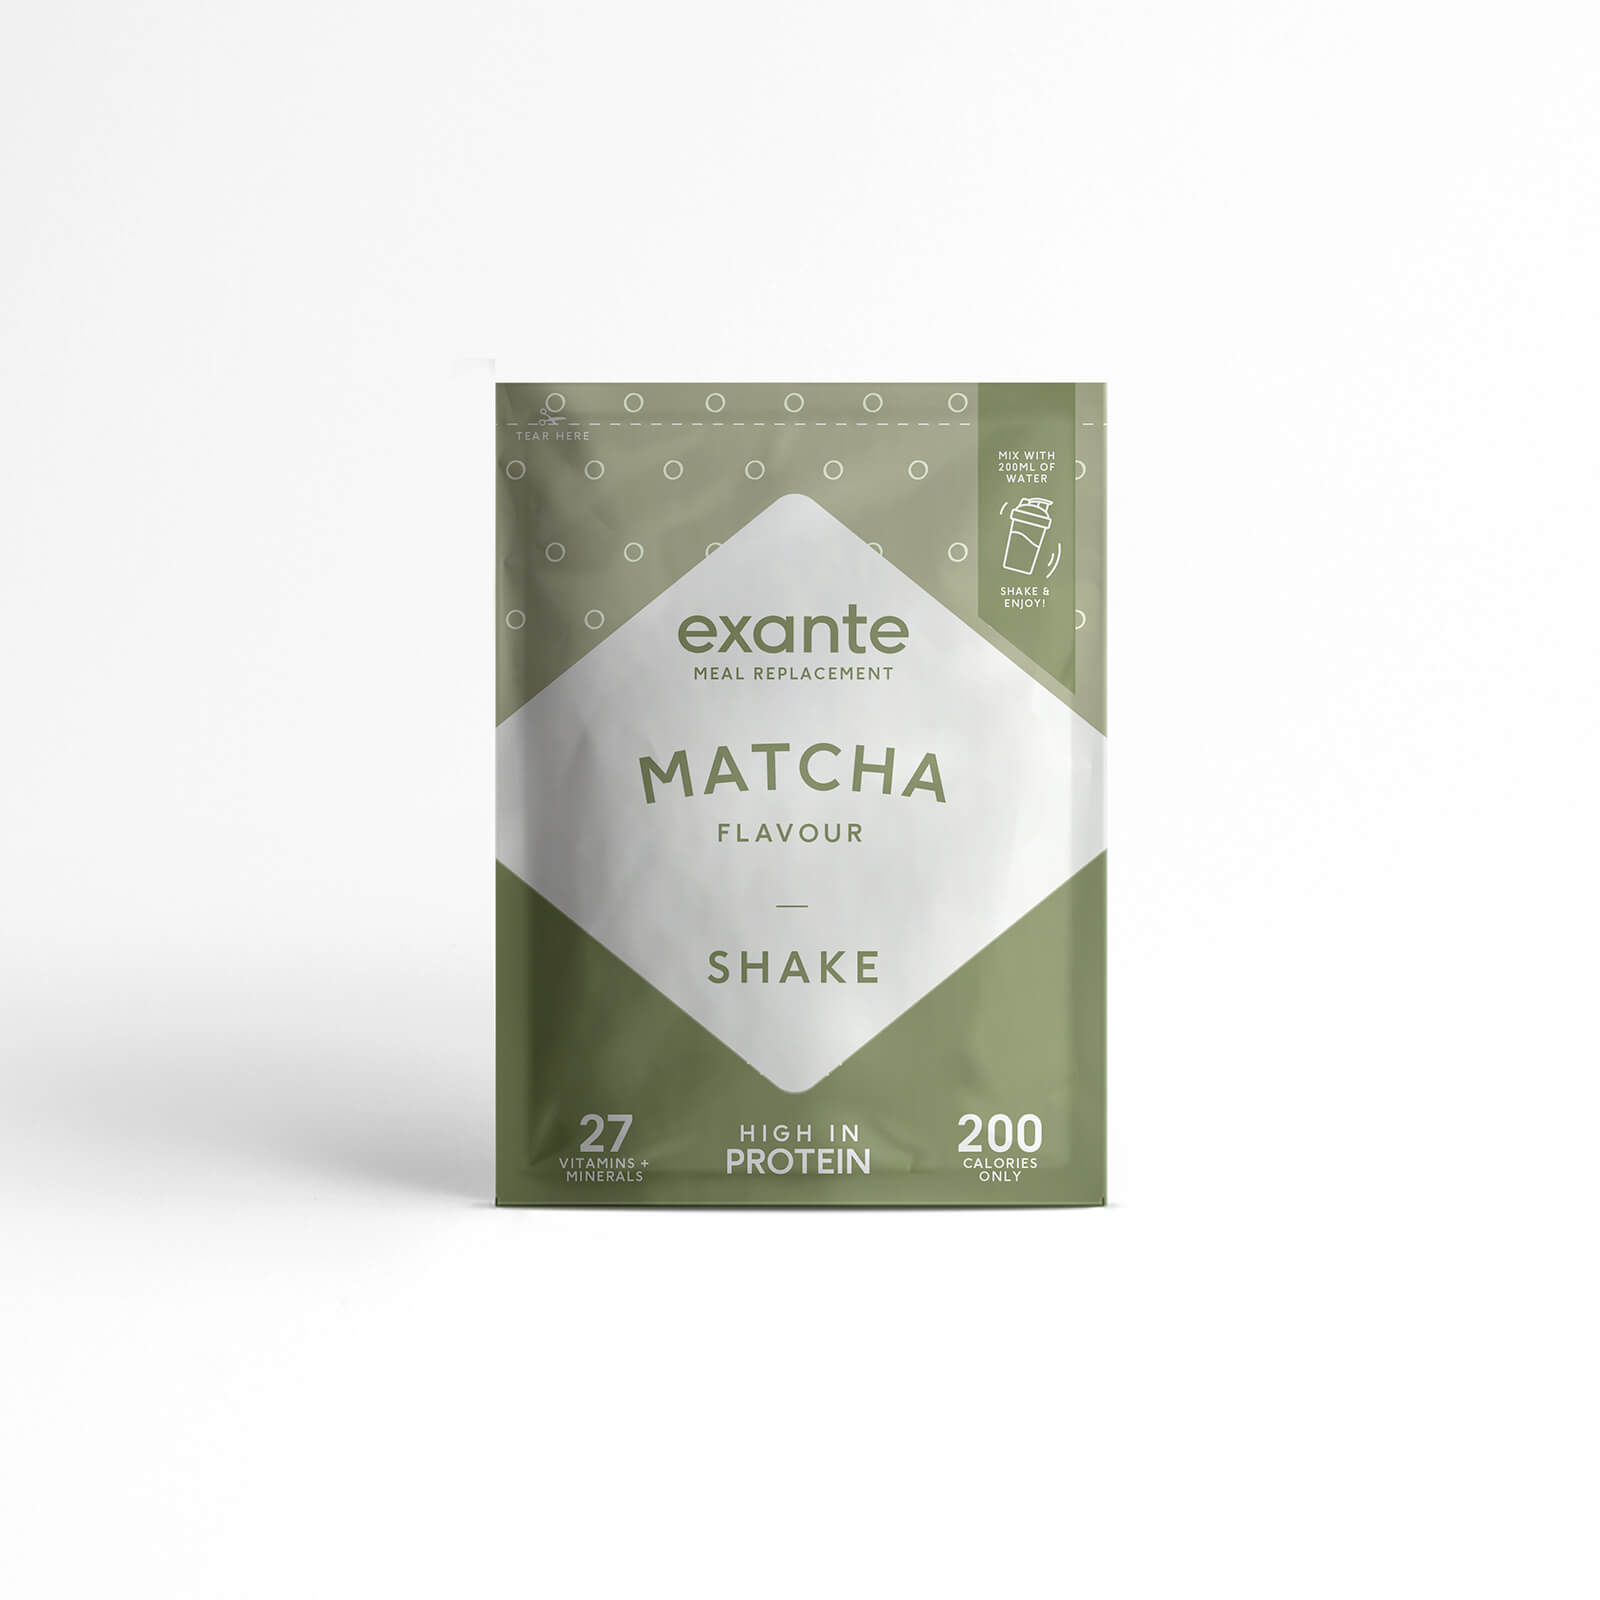 Exante Diet Meal Replacement Matcha Shake